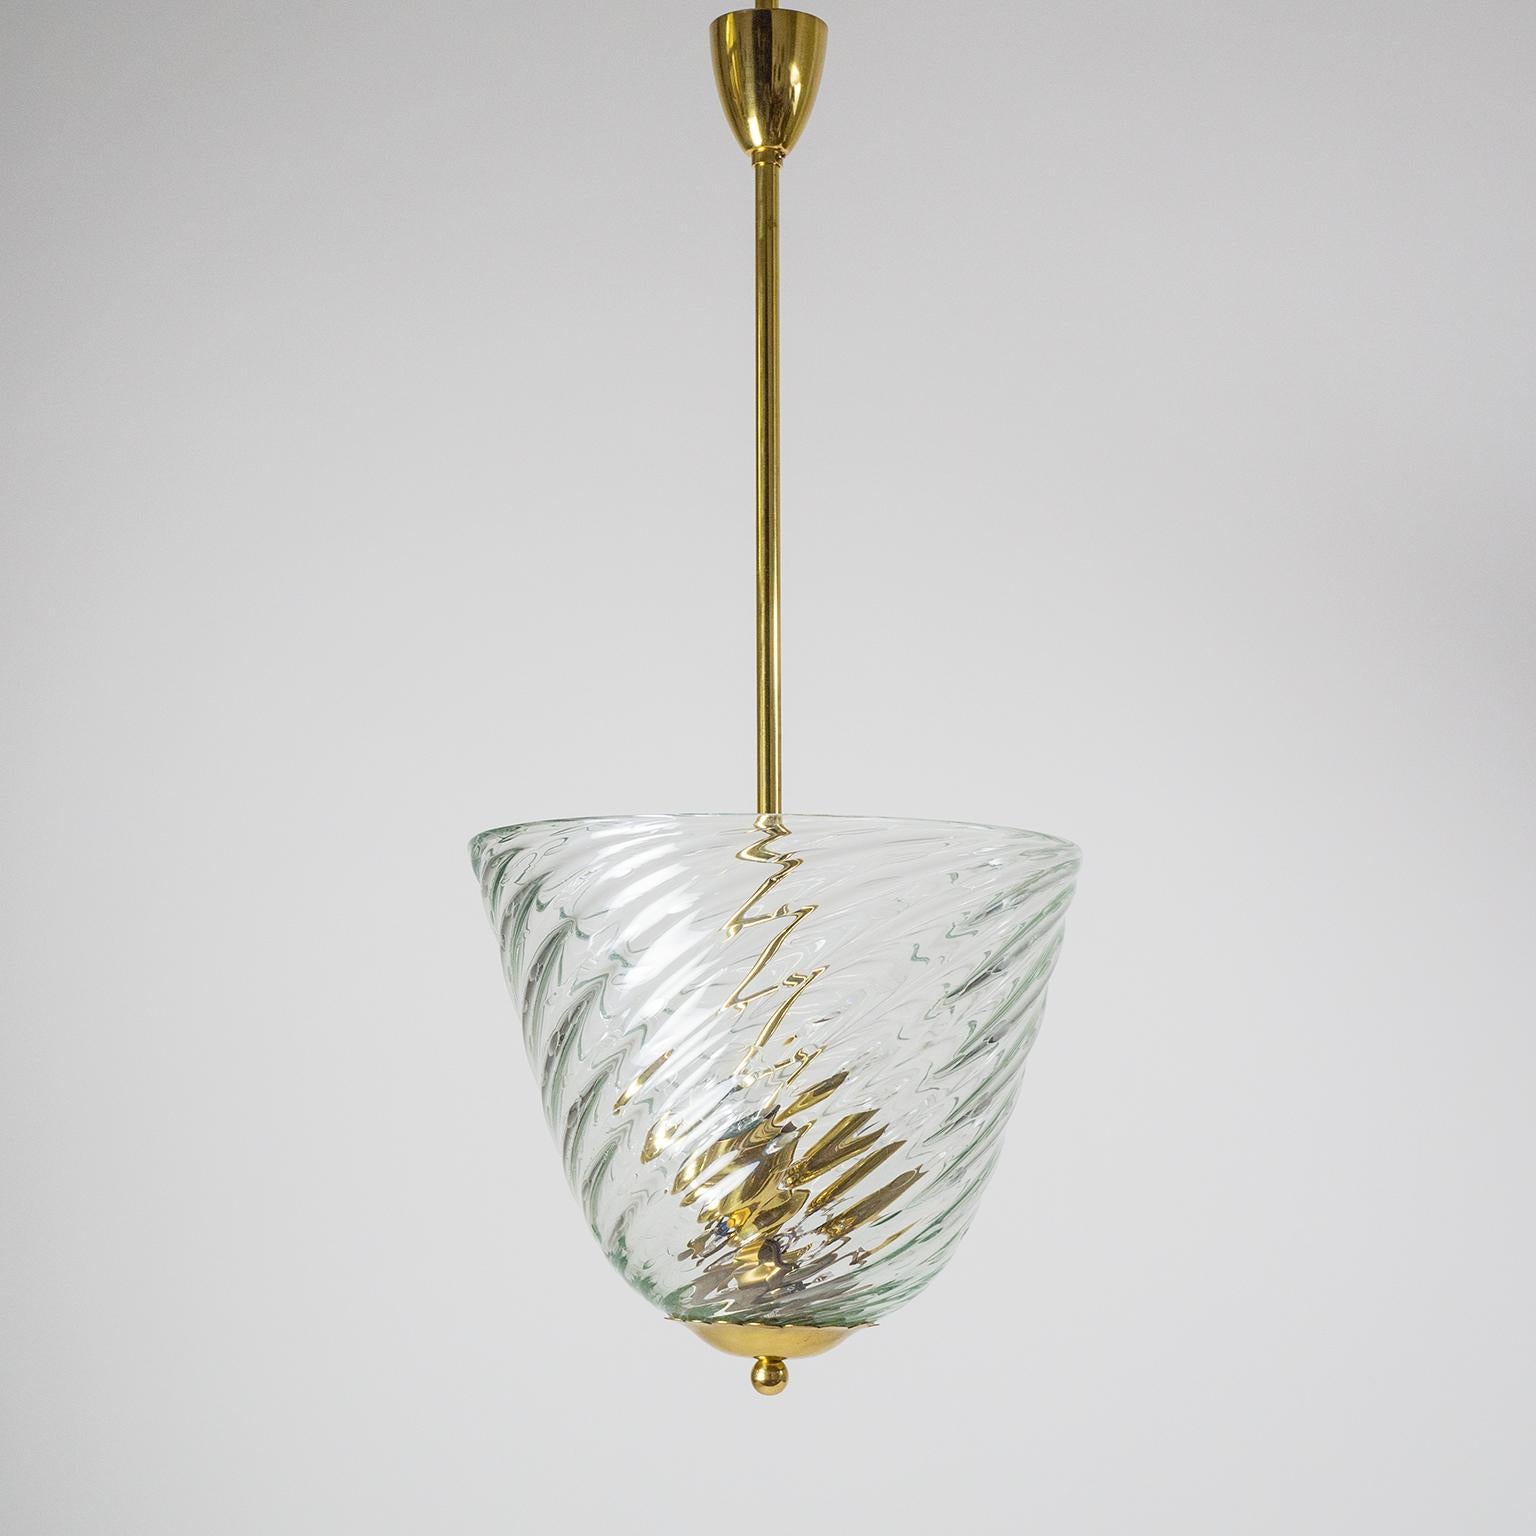 Impressive Murano glass basket chandelier attributed to Barovier & Toso. Solid brass hardware with a large hand blown swirling glass basket in bullicante technique (denotes a regular pattern of enclosed air bubbles). Three original brass E27 sockets